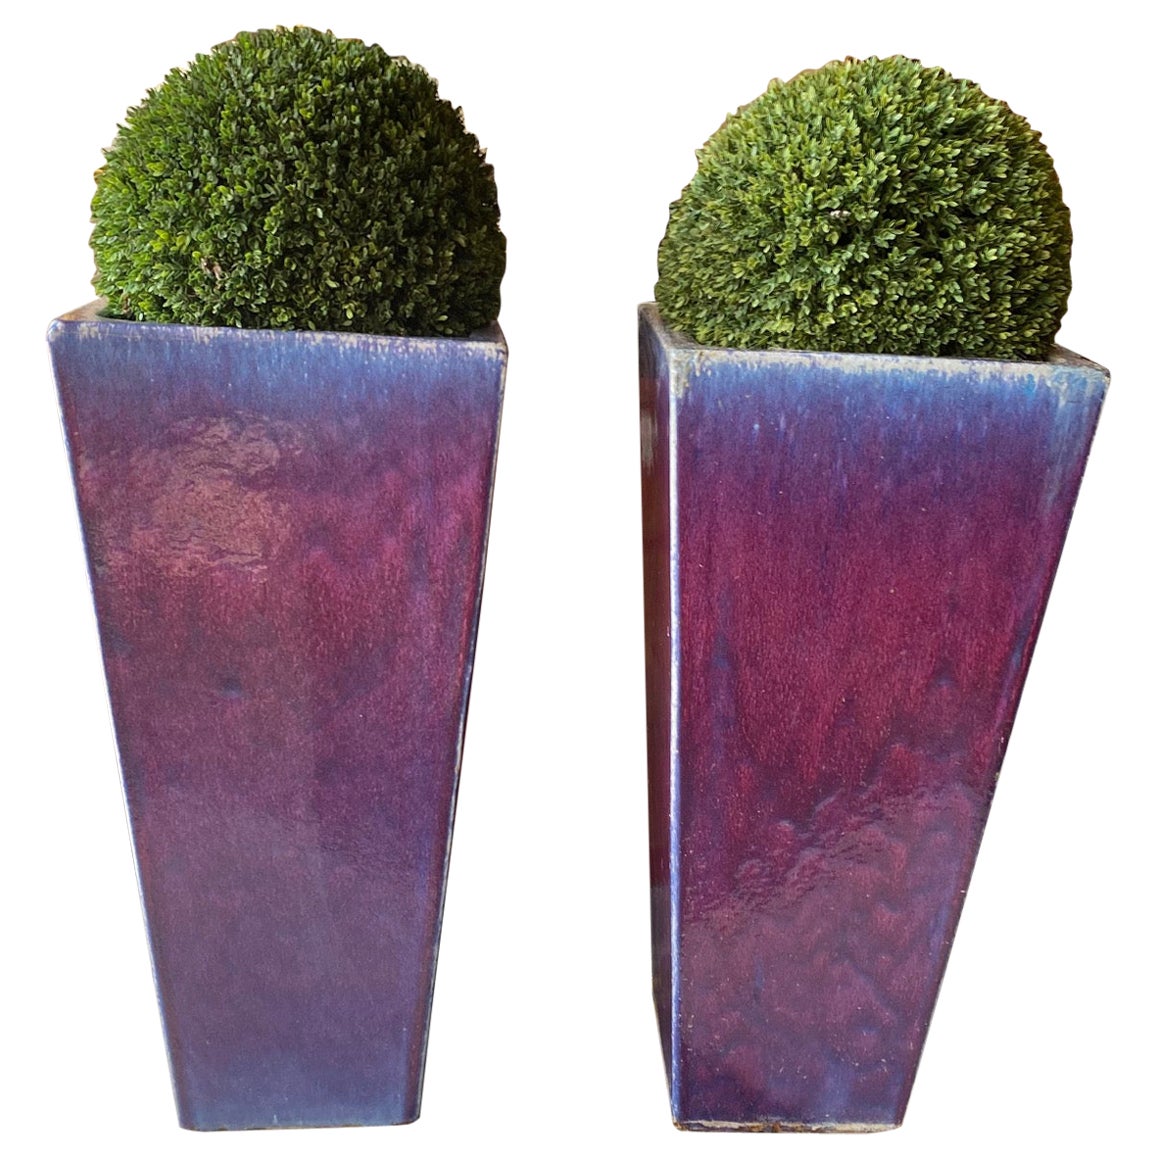 Pair of Ceramic Blue and Ombre'/Purple Lead Glazetall Planters W/ Topiary Plants For Sale